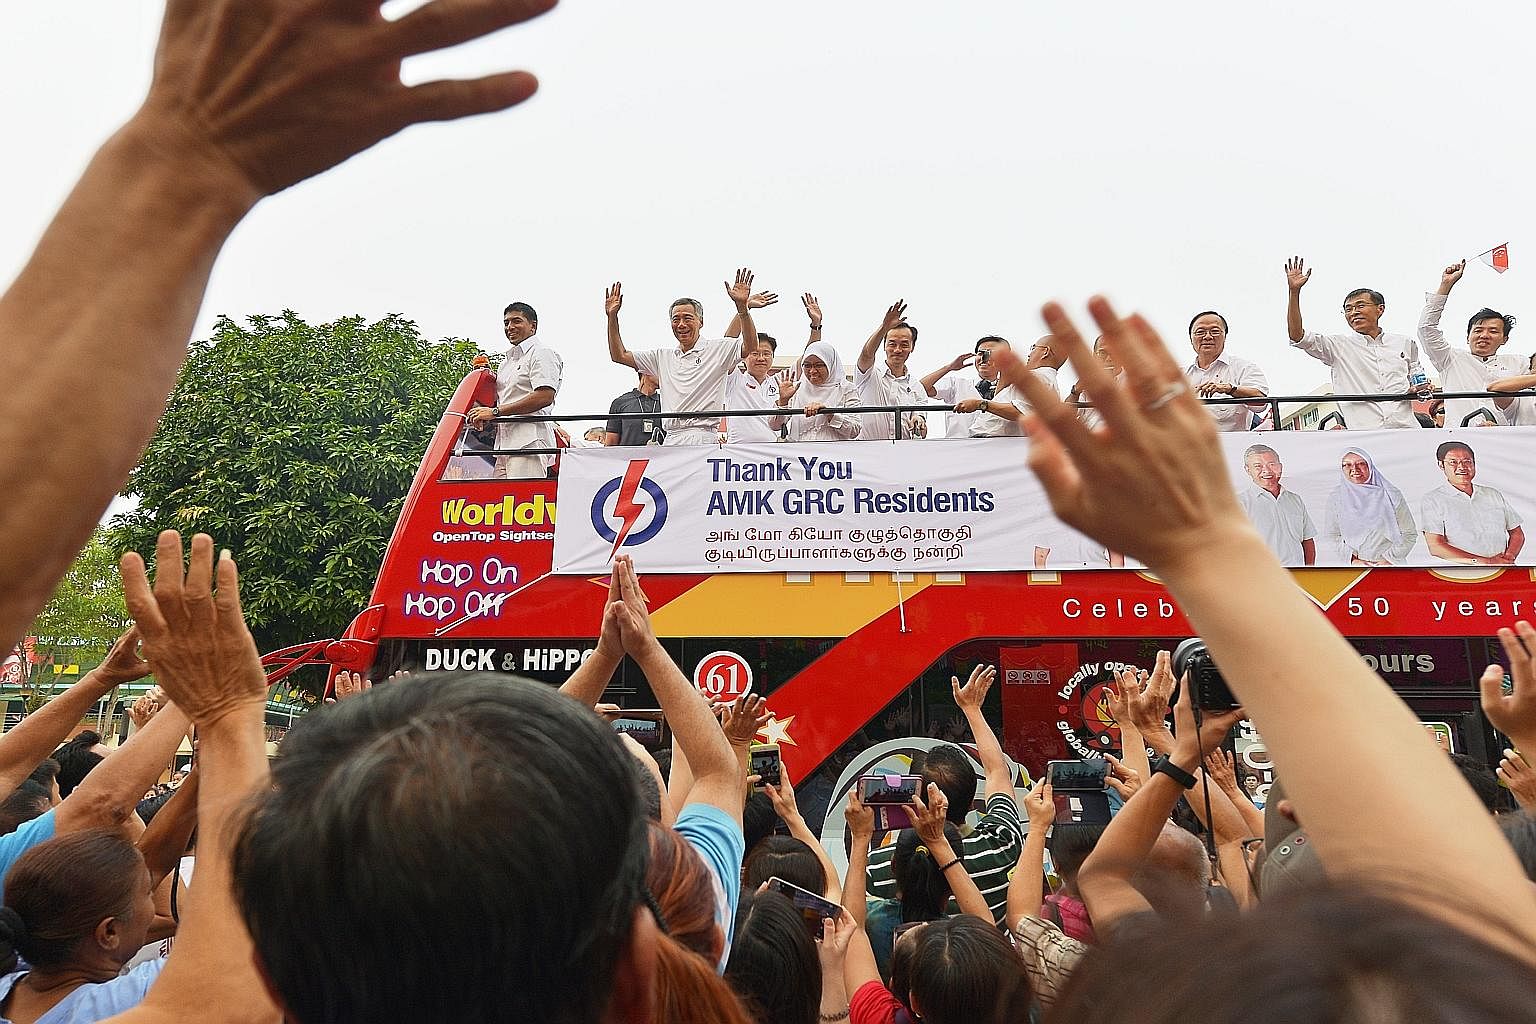 Prime Minister Lee Hsien Loong and his team making their way around Ang Mo Kio GRC on an open-top bus to thank voters last Saturday, the day after Polling Day.